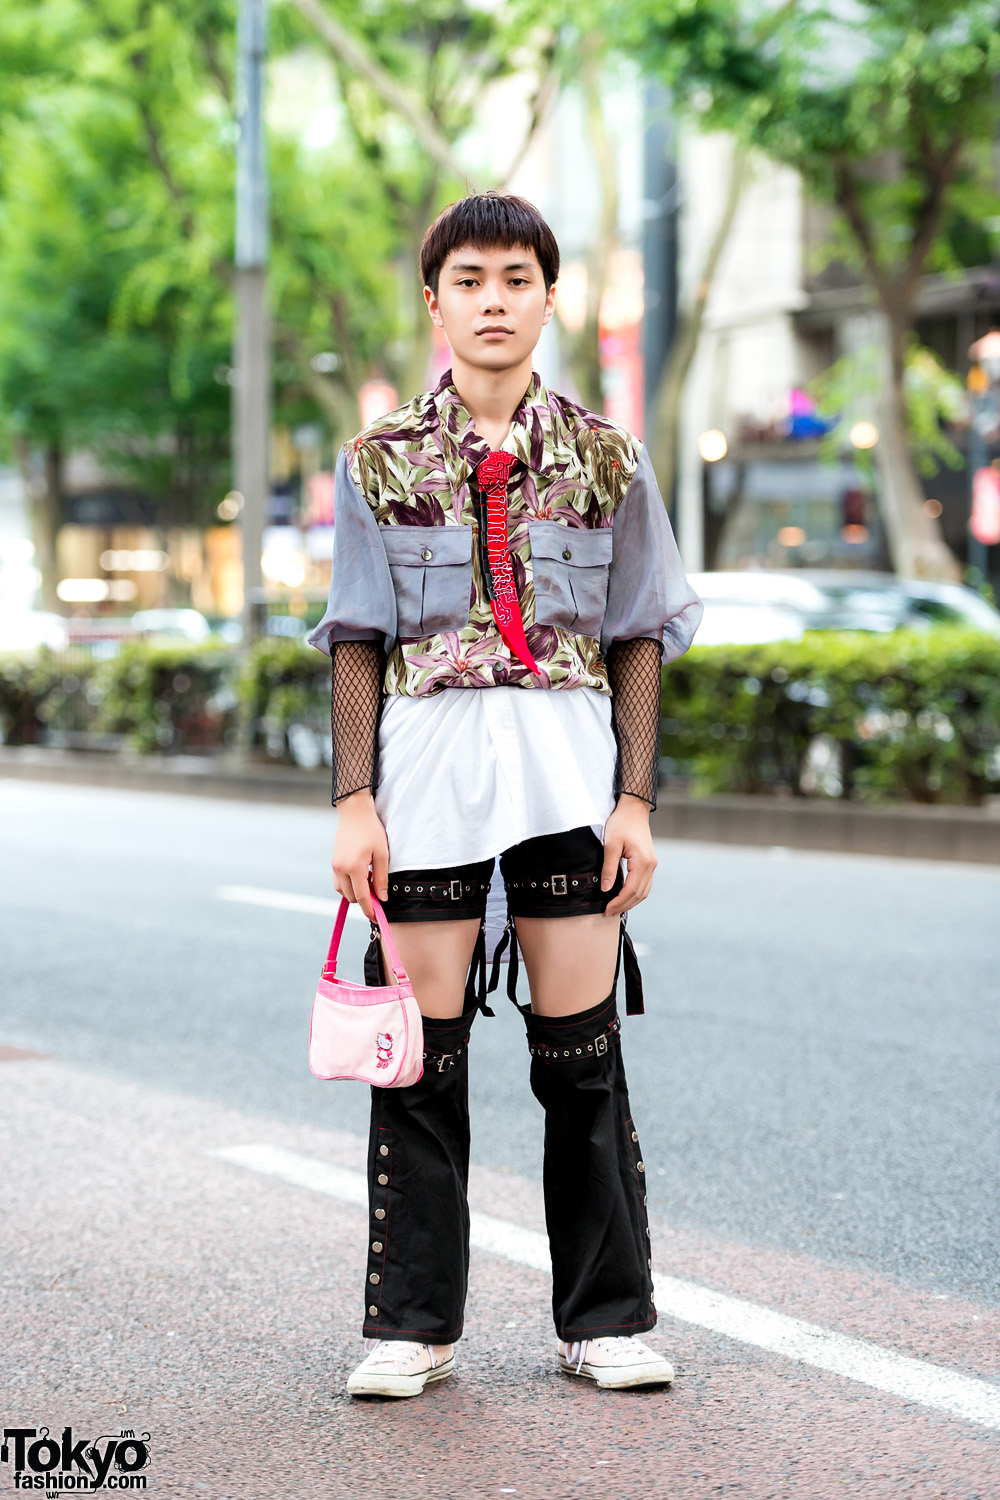 Japanese Street Style w/ Floral Print Shirt, Cut Out Pants, Converse Sneakers & Hello Kitty Handbag